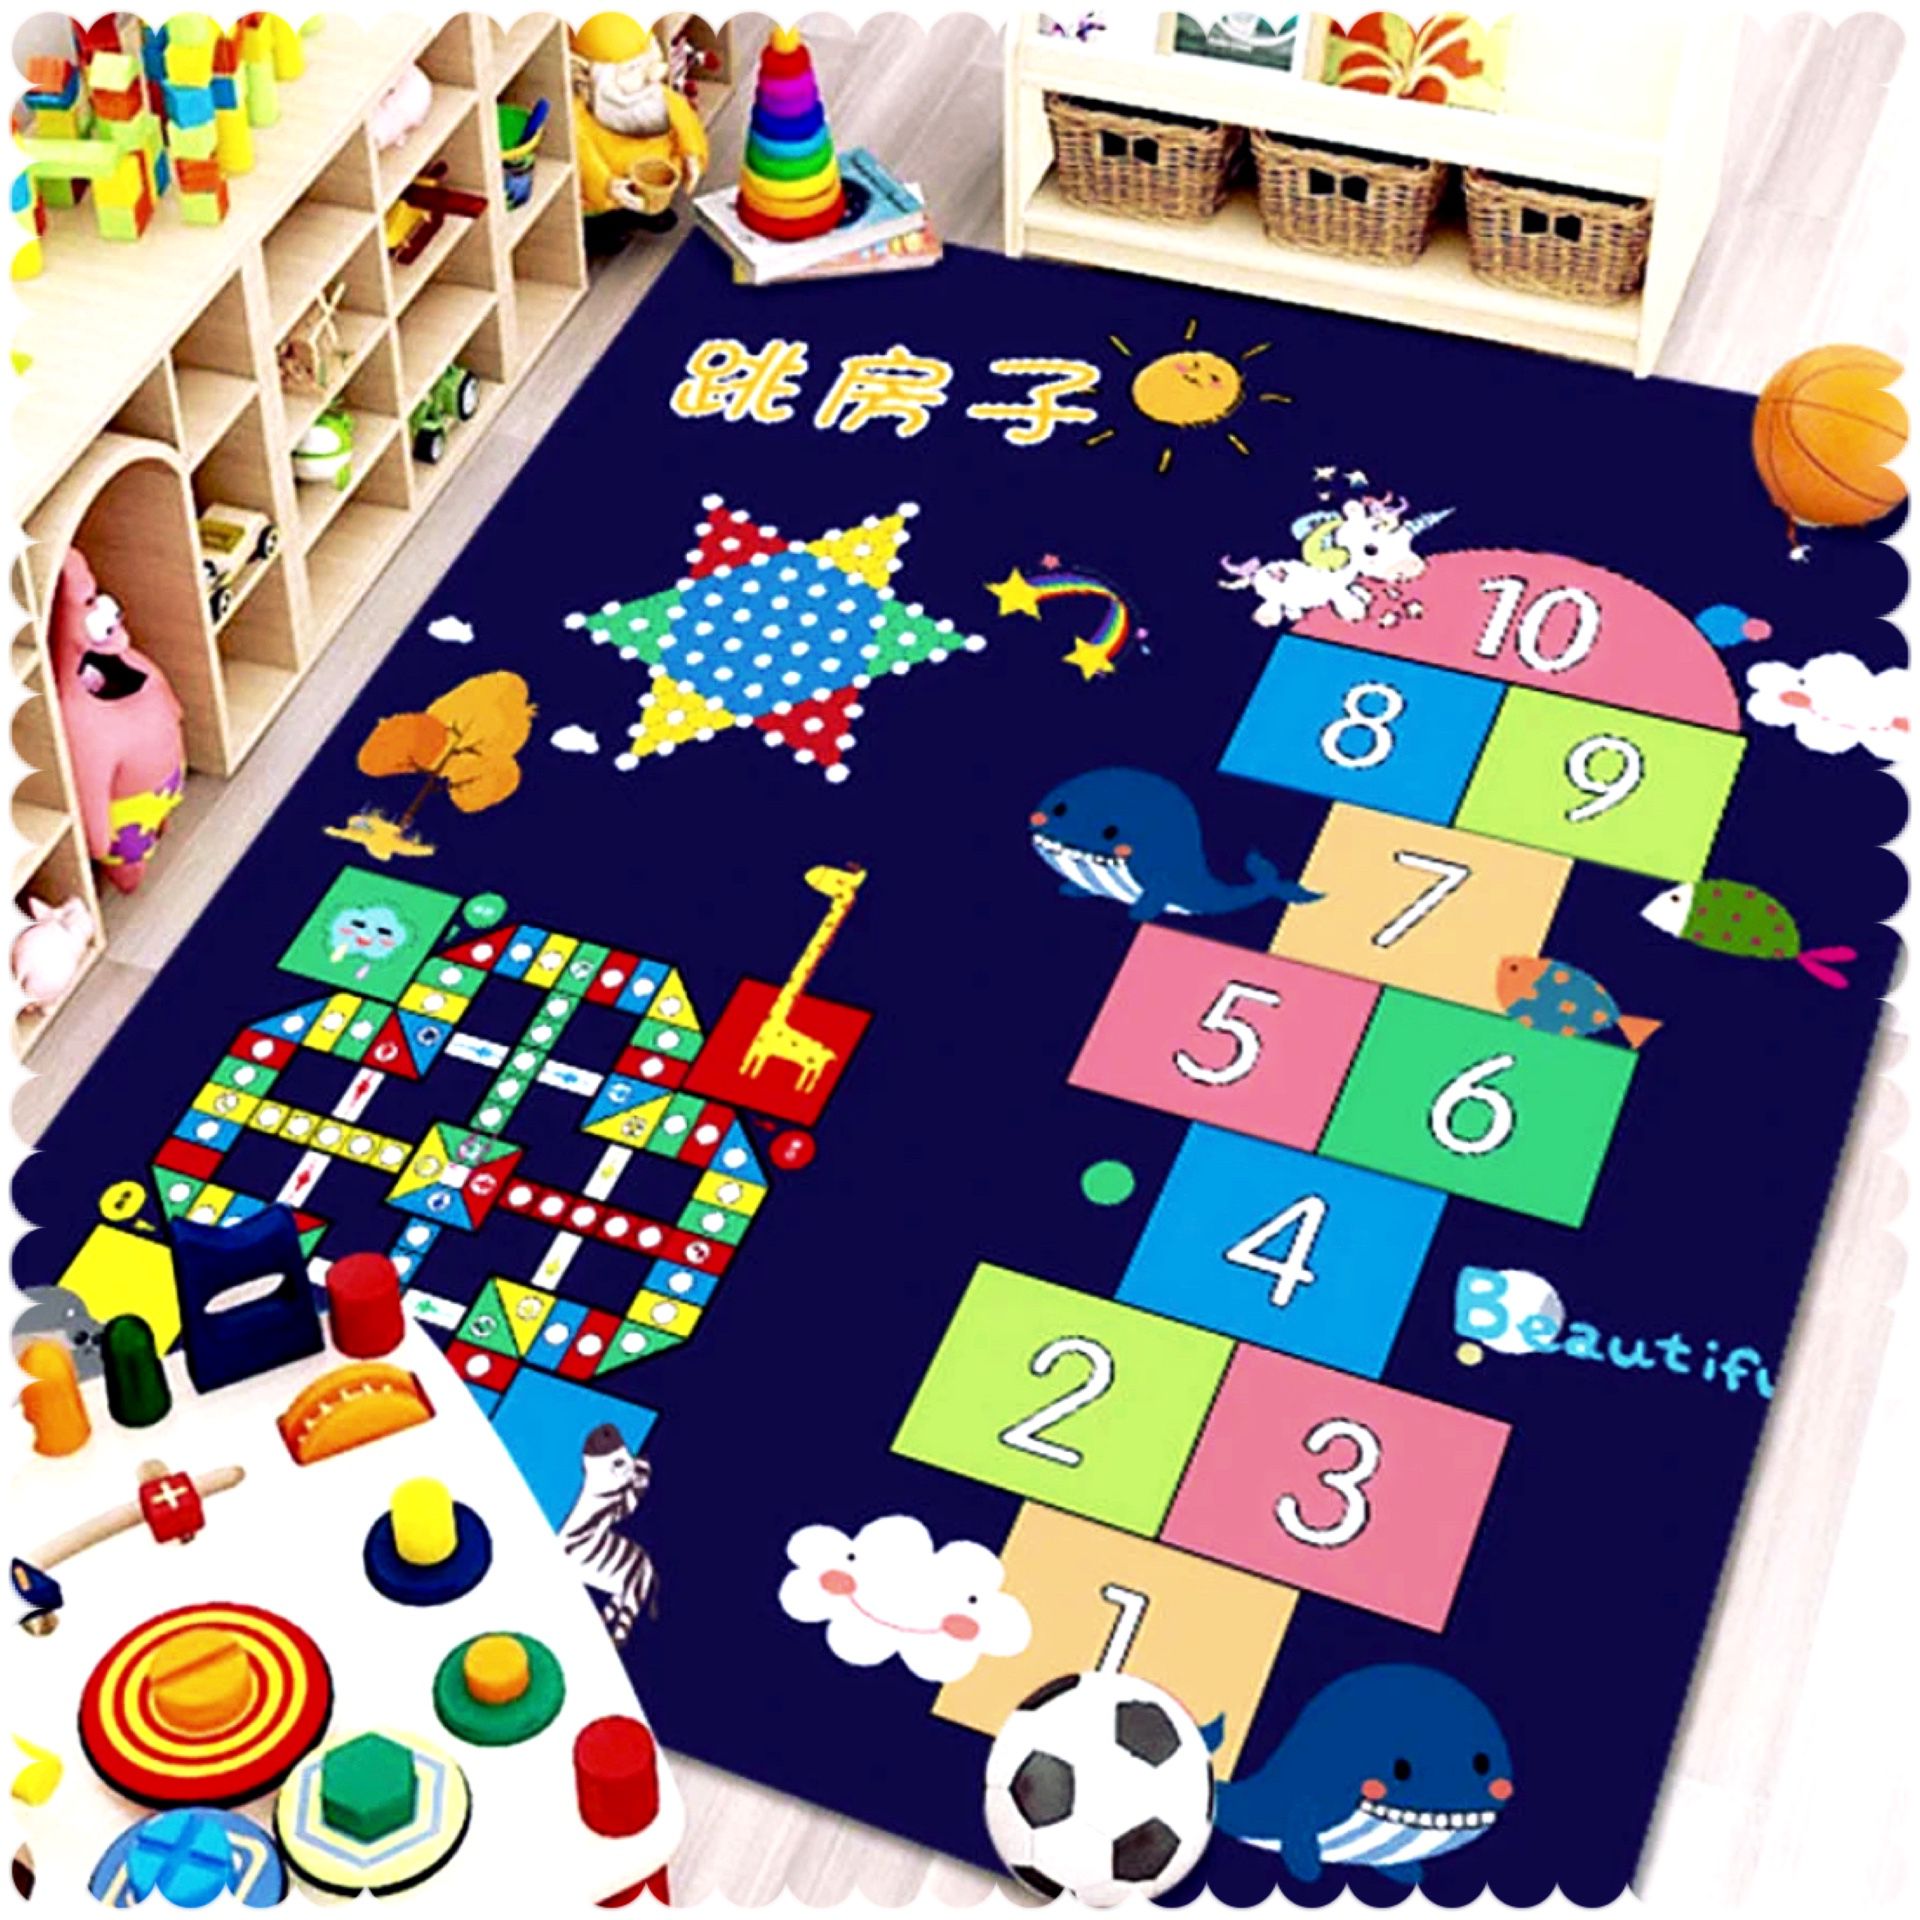 Kids Playmat /Carpet/ Rug 91” x 63” Inches OR 7.55ft X 5.5ft OR 230x160cm